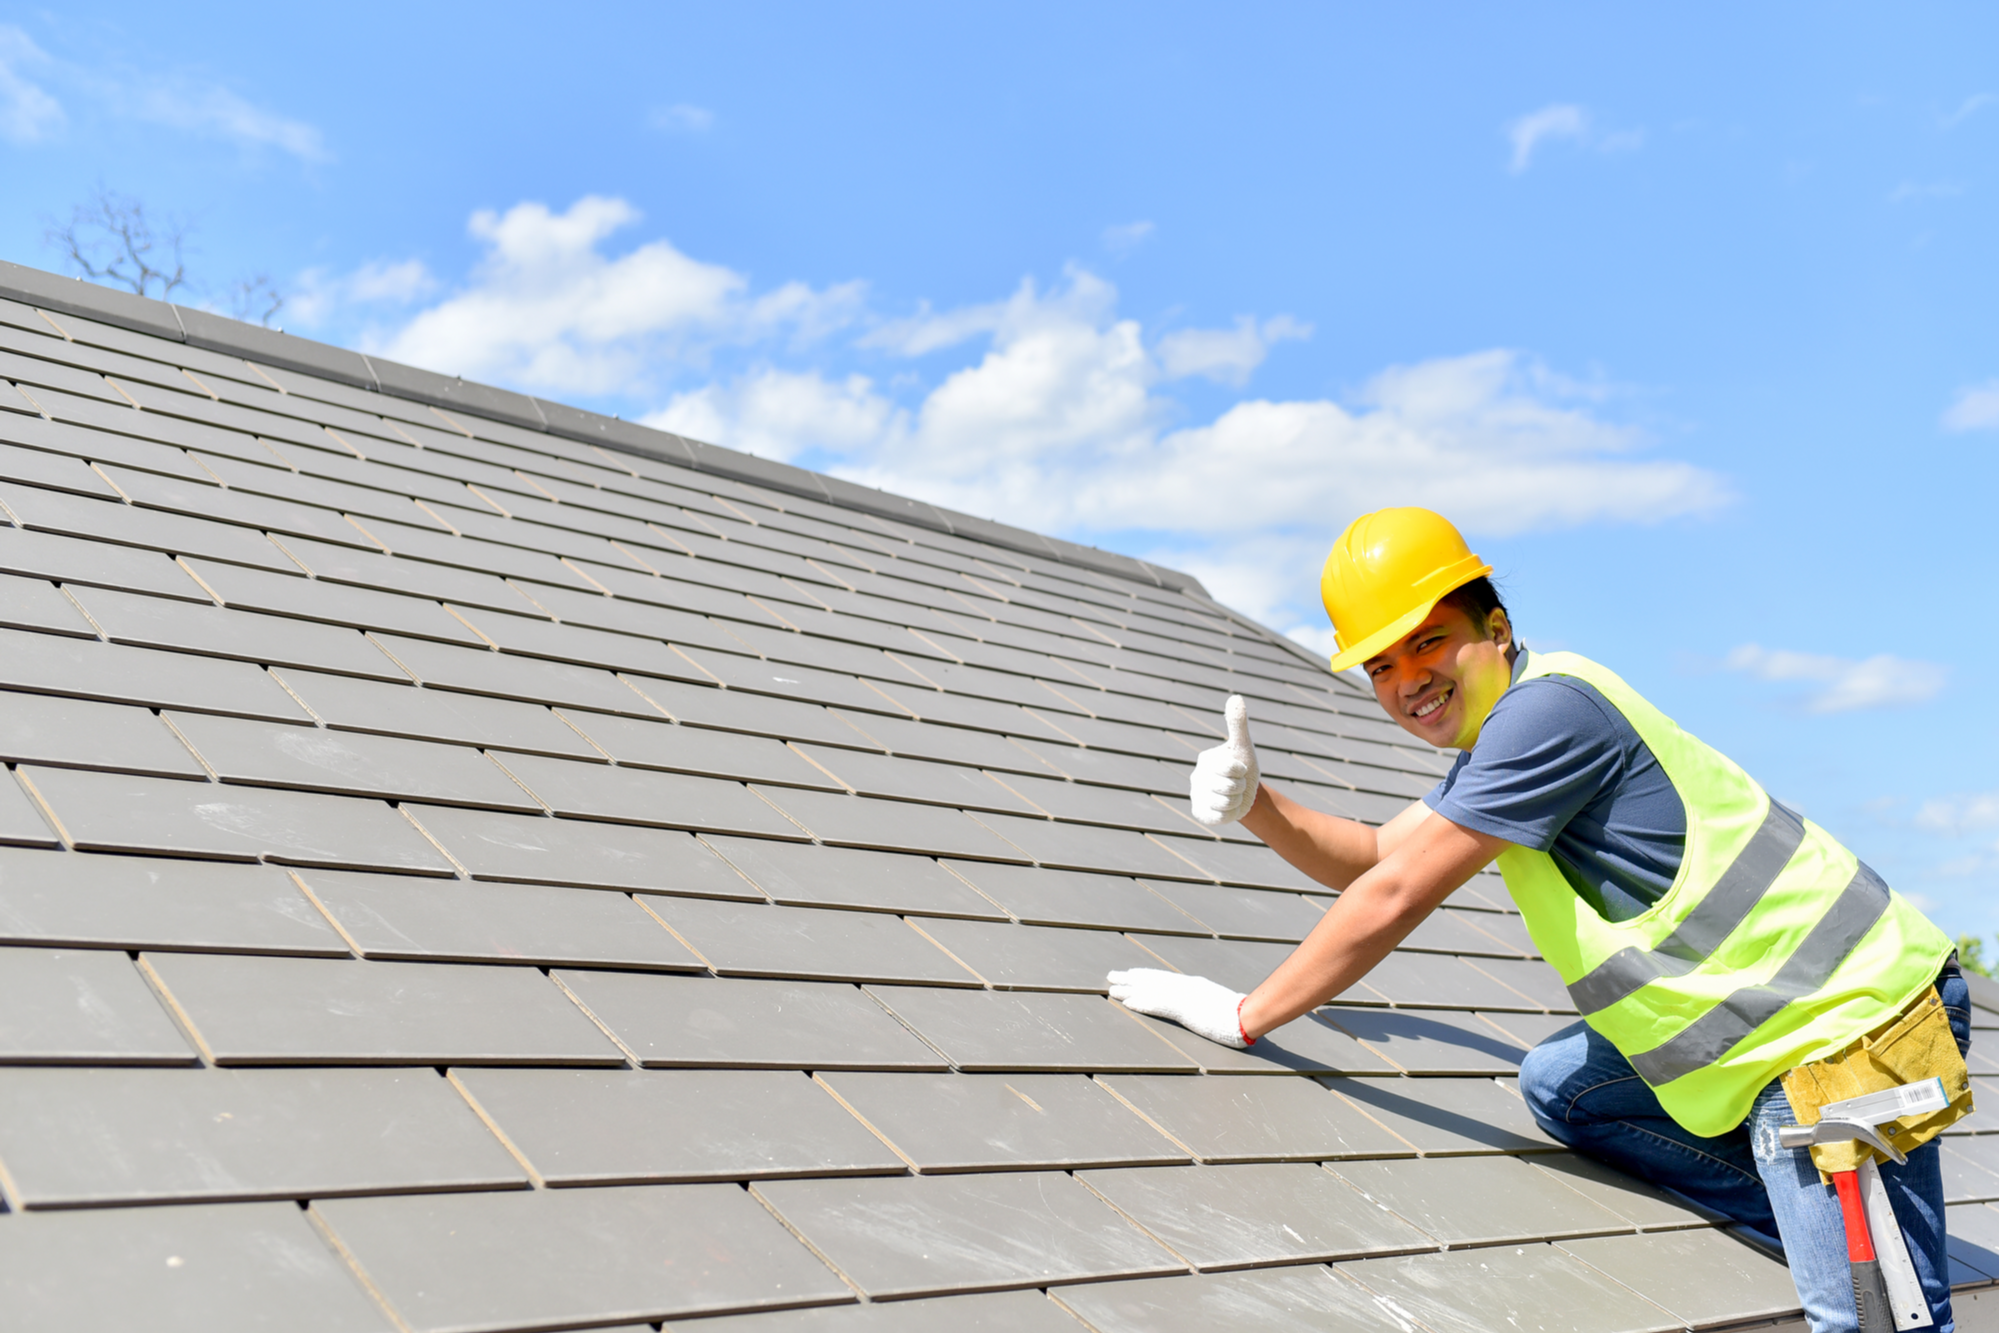 Roofing_Insurance_Header_HBI.png?width=6000&name=Roofing_Insurance_Header_HBI.png